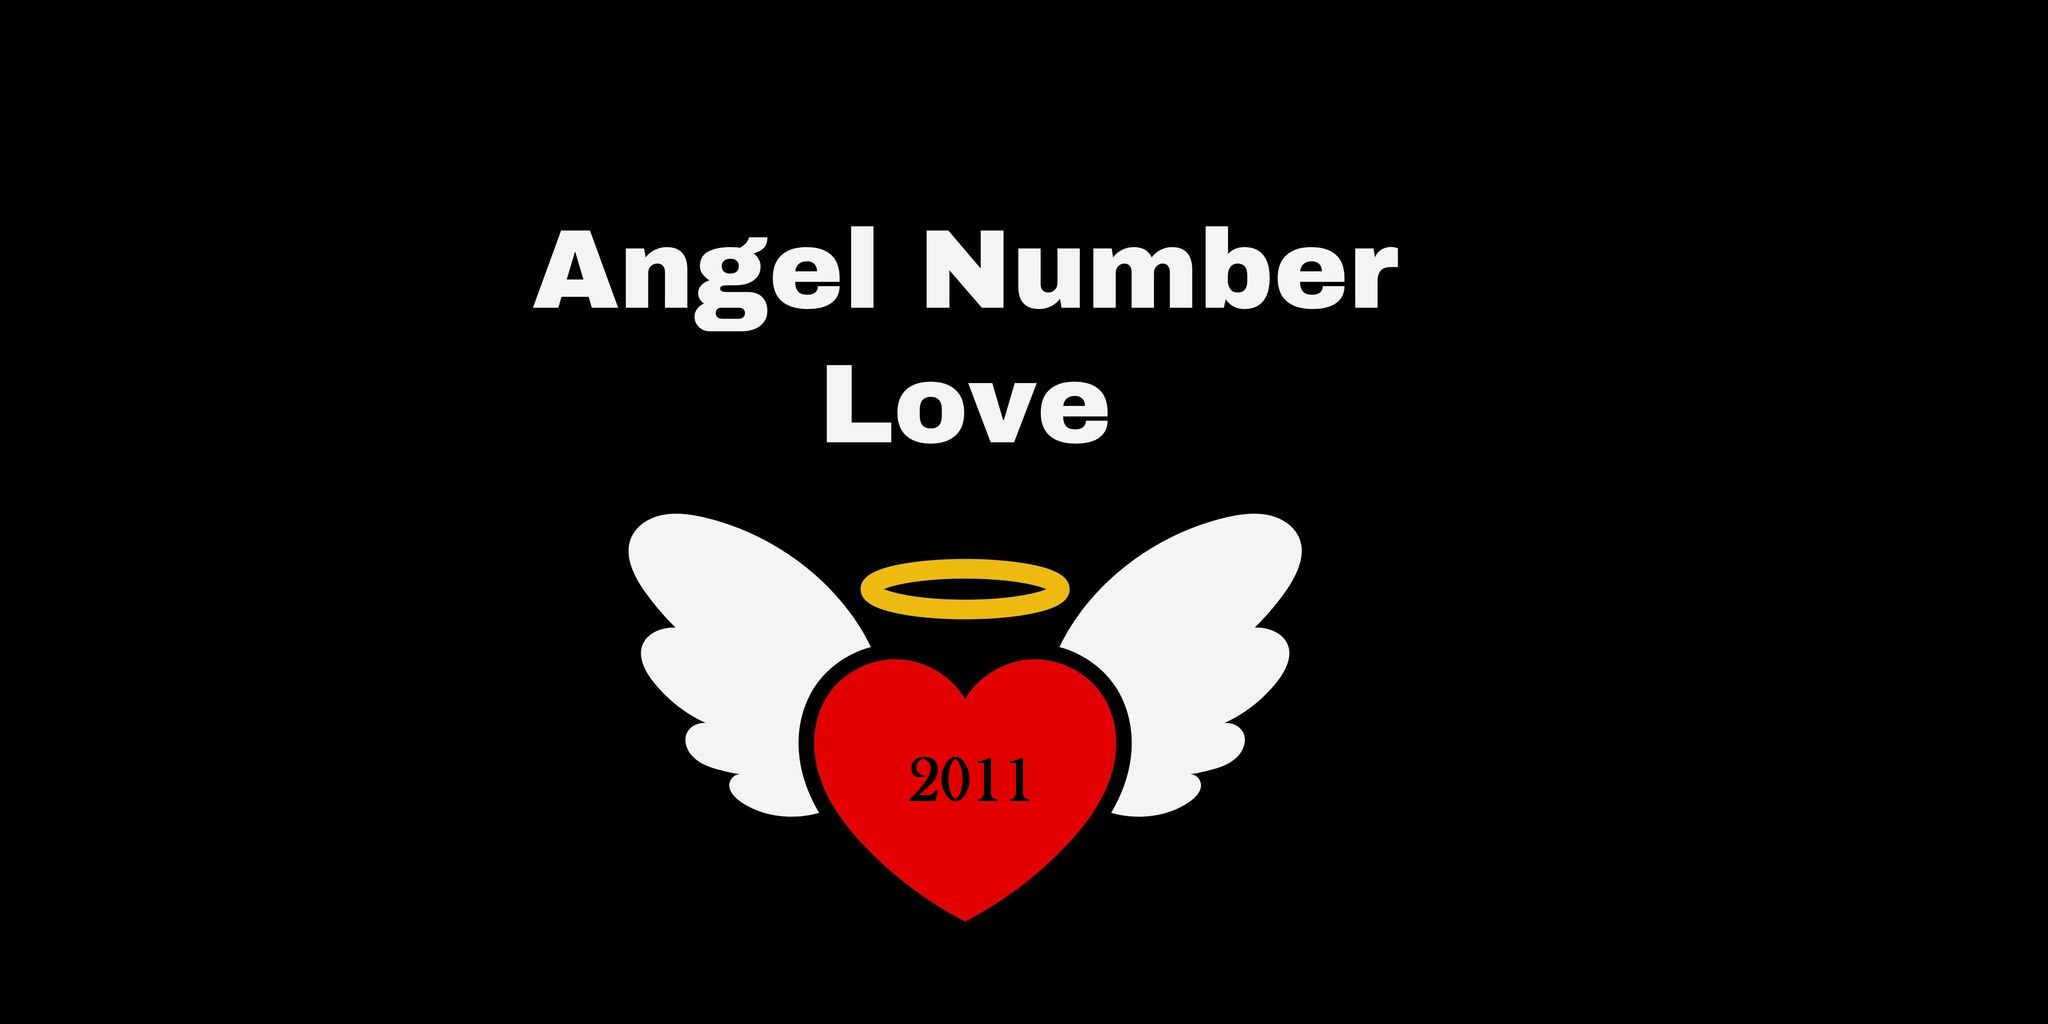 2011 Angel Number Meaning In Love